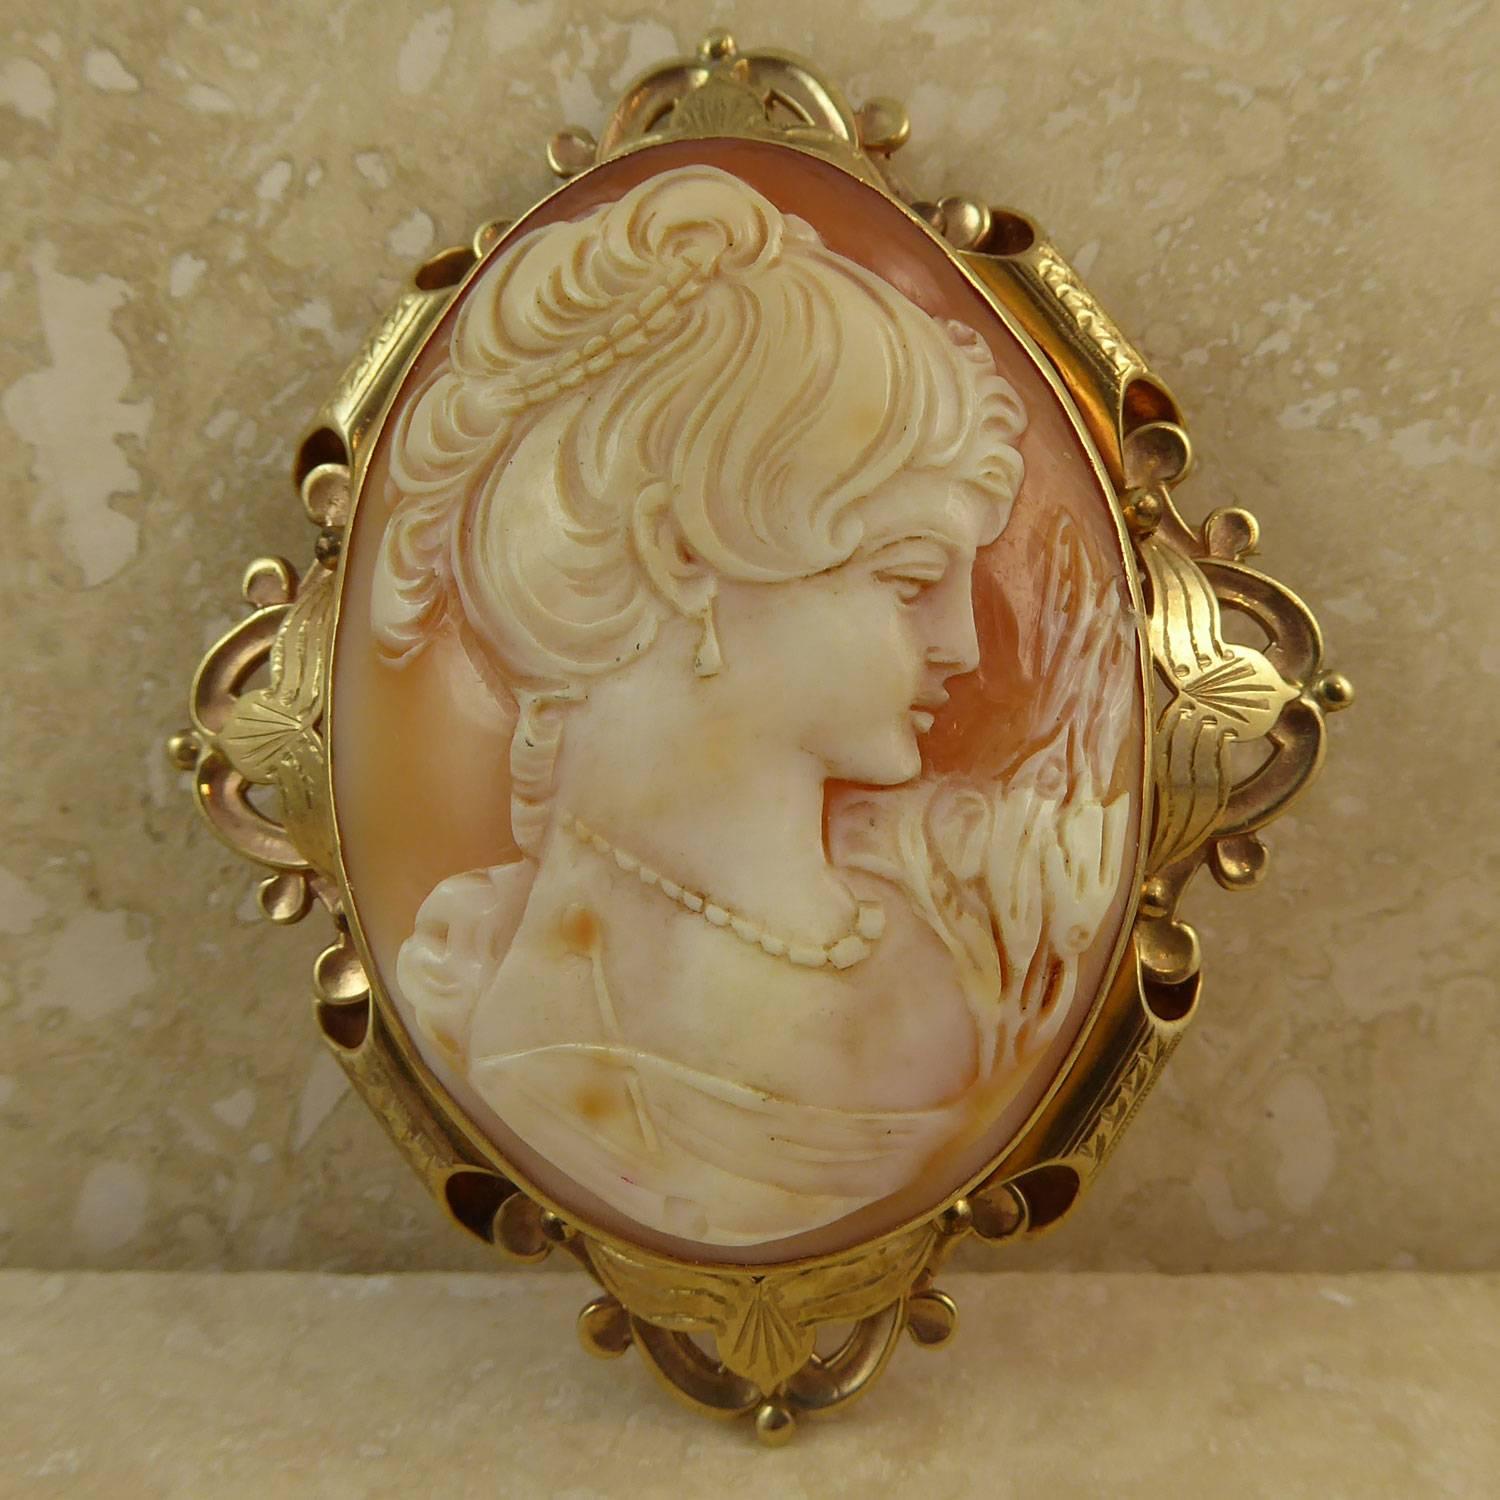 A vintage cameo brooch from 1965 in an imposing size and with an impressive sculptural gold frame.  The cameo depicts an attractive woman in profile against the amber background of the conch shell.  She appears to be in a contemplative mood and has